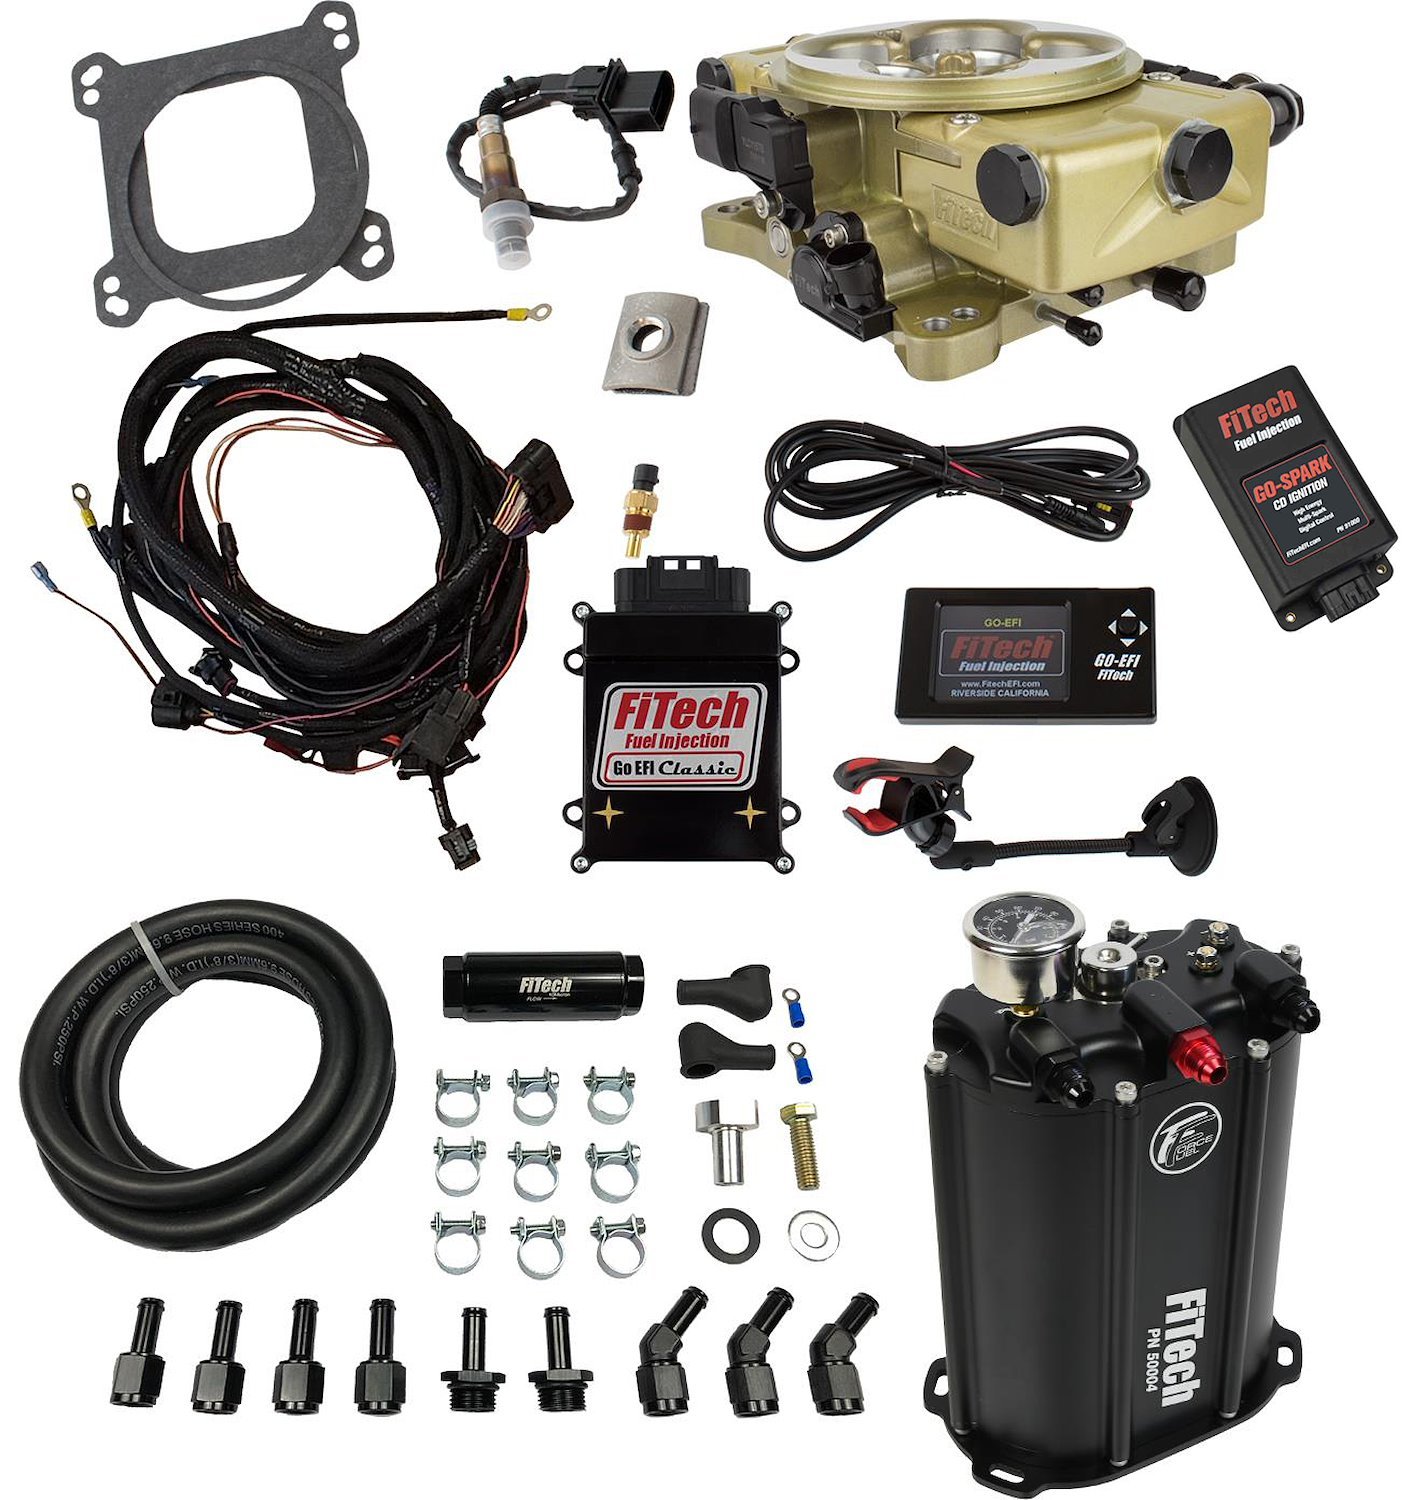 Go EFI Classic 650 HP Throttle Body Fuel Injection Master Kit [with Force Fuel System & CDI Box] Classic Gold